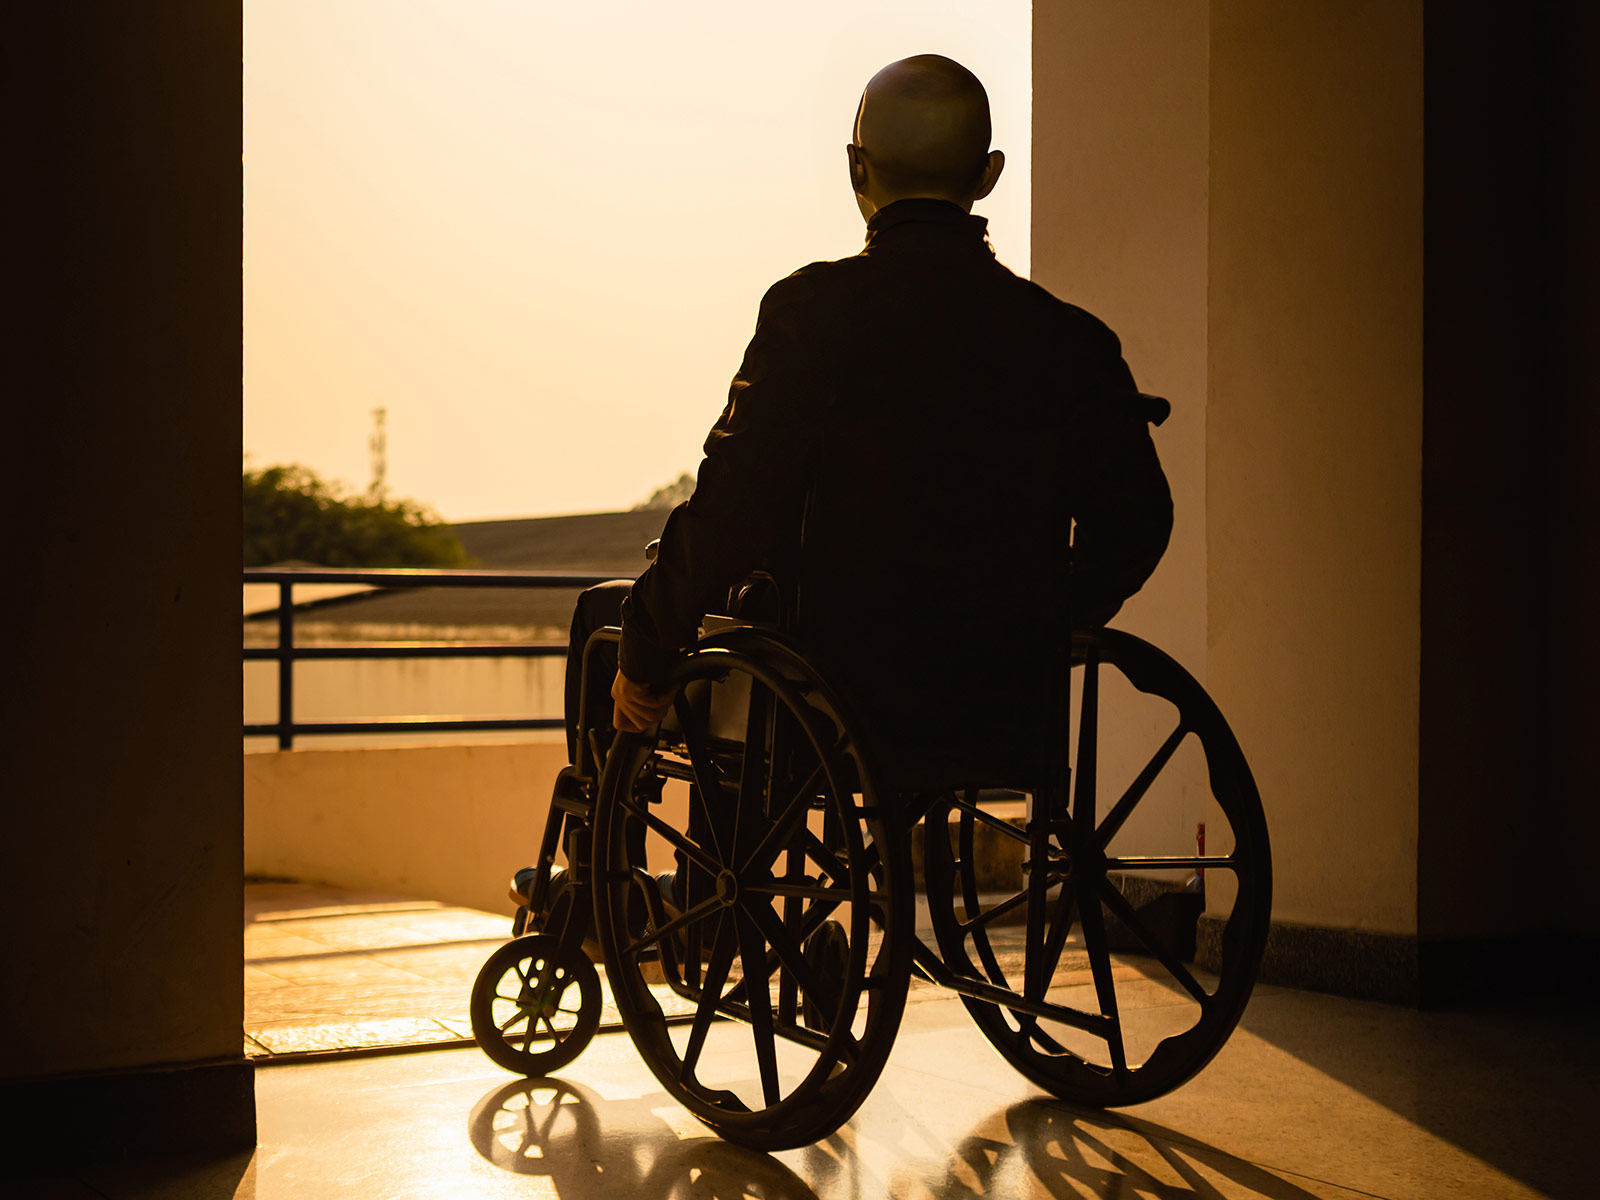 Image of an elderly male sitting in a wheelchair, facing towards the sun in the background.